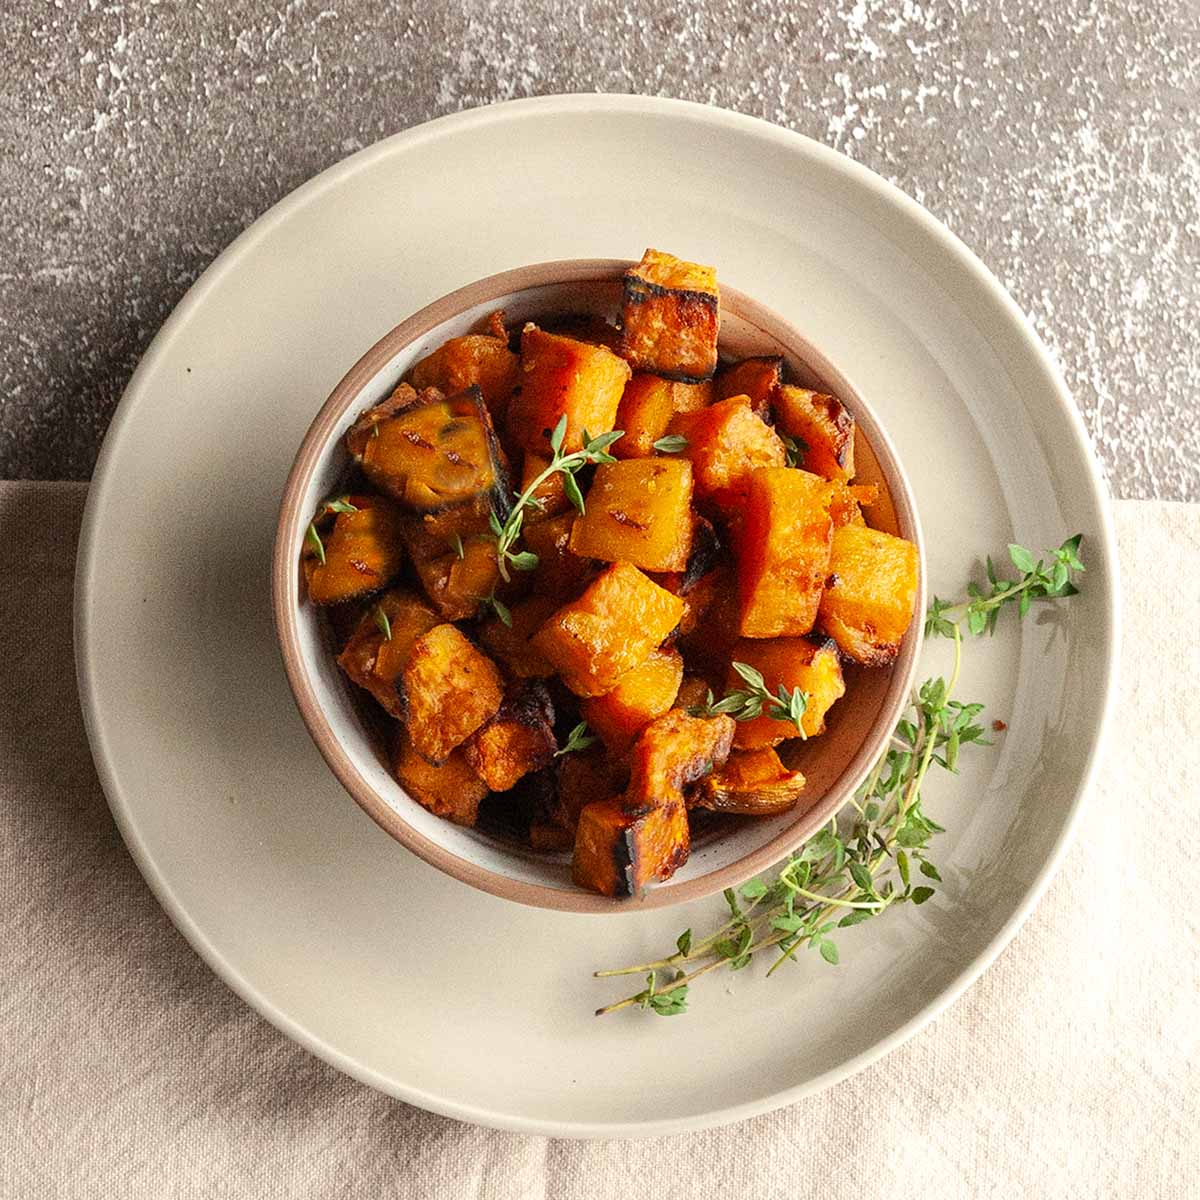 A bowl of cubed smoked sweet potatoes with crispy edges, with several thyme sprigs on the side.